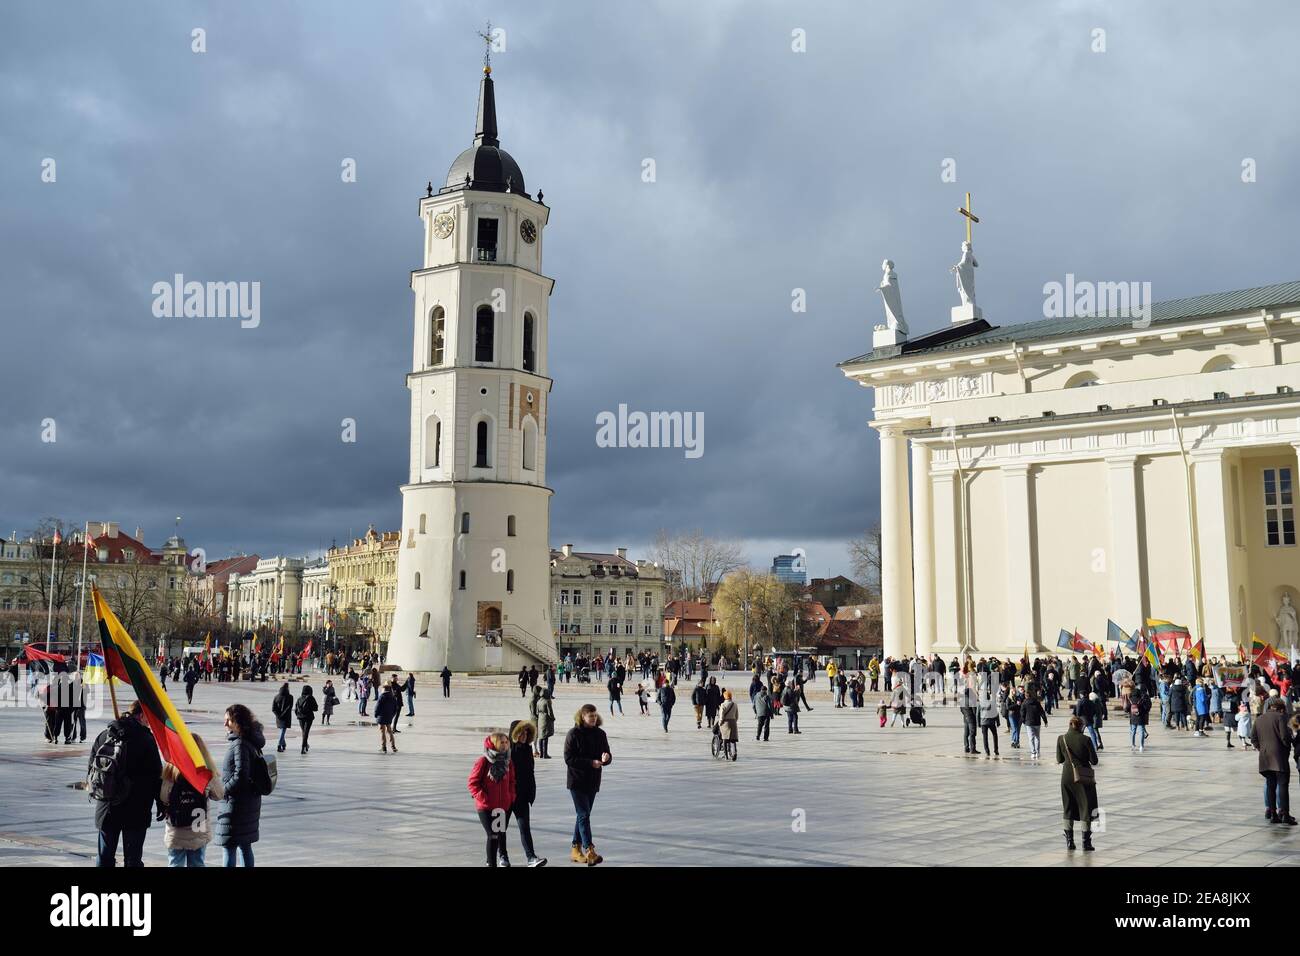 VILNIUS, LITHUANIA - MARCH 11, 2020: Thousands of people taking part in a festive events as Lithuania marked the 30th anniversary of its independence Stock Photo